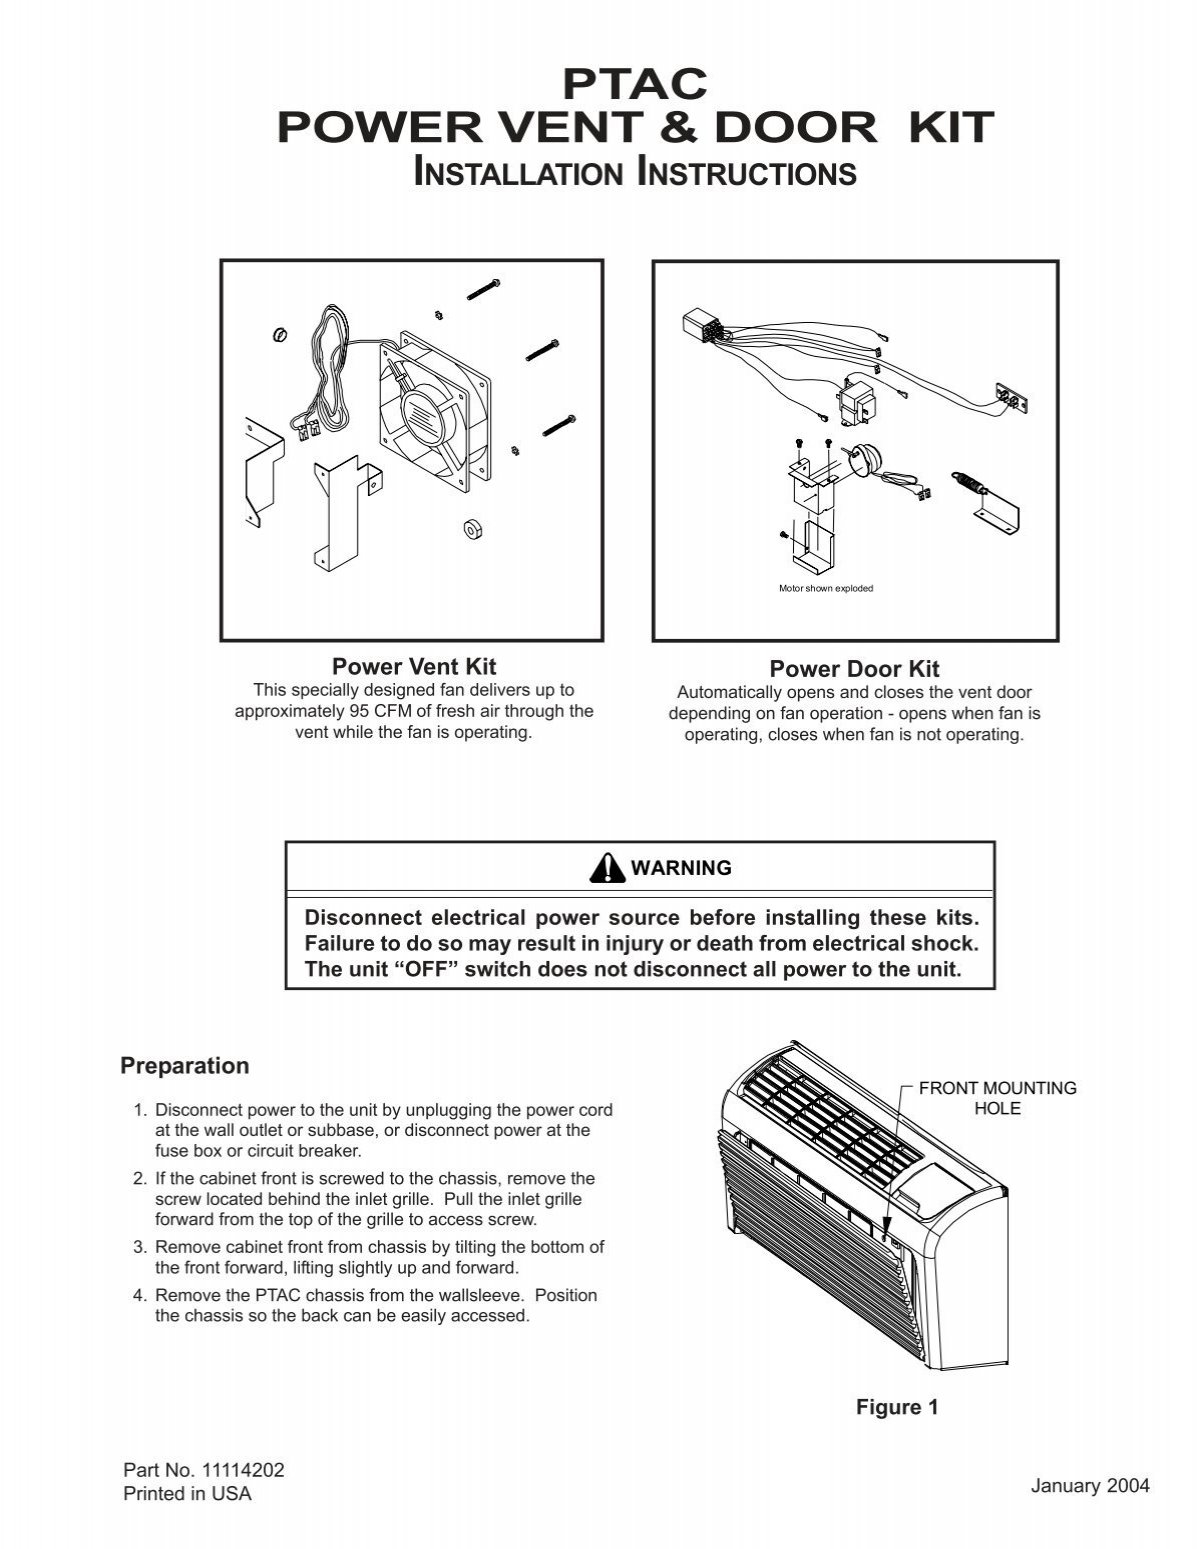 WIRING INSTRUCTIONS 1. To